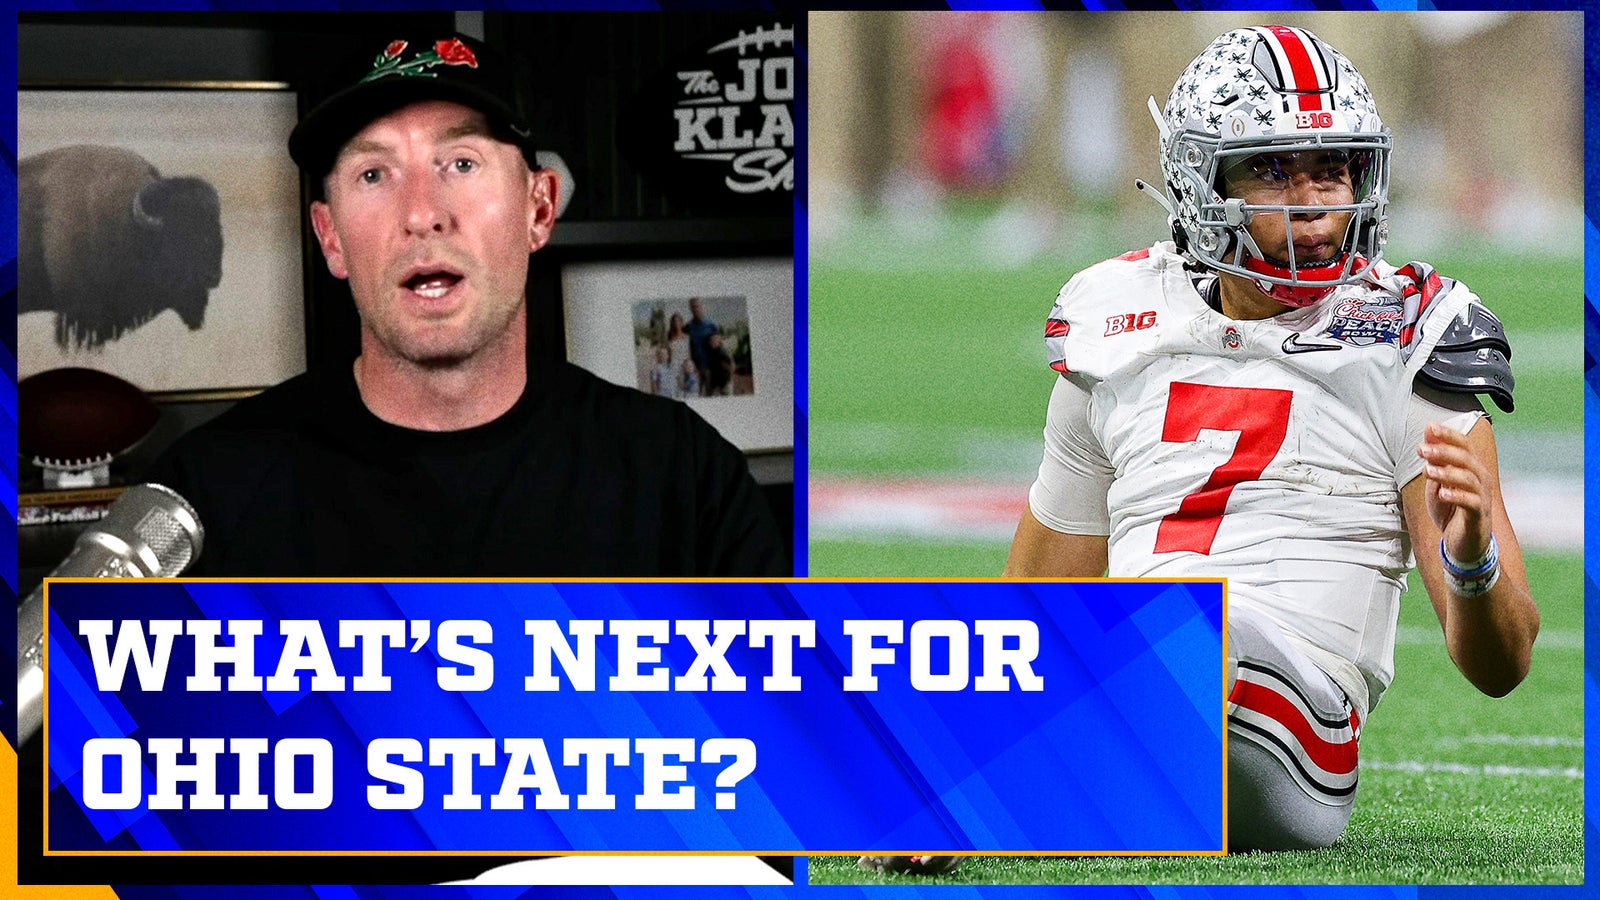 How should Buckeye fans feel about Ohio State?